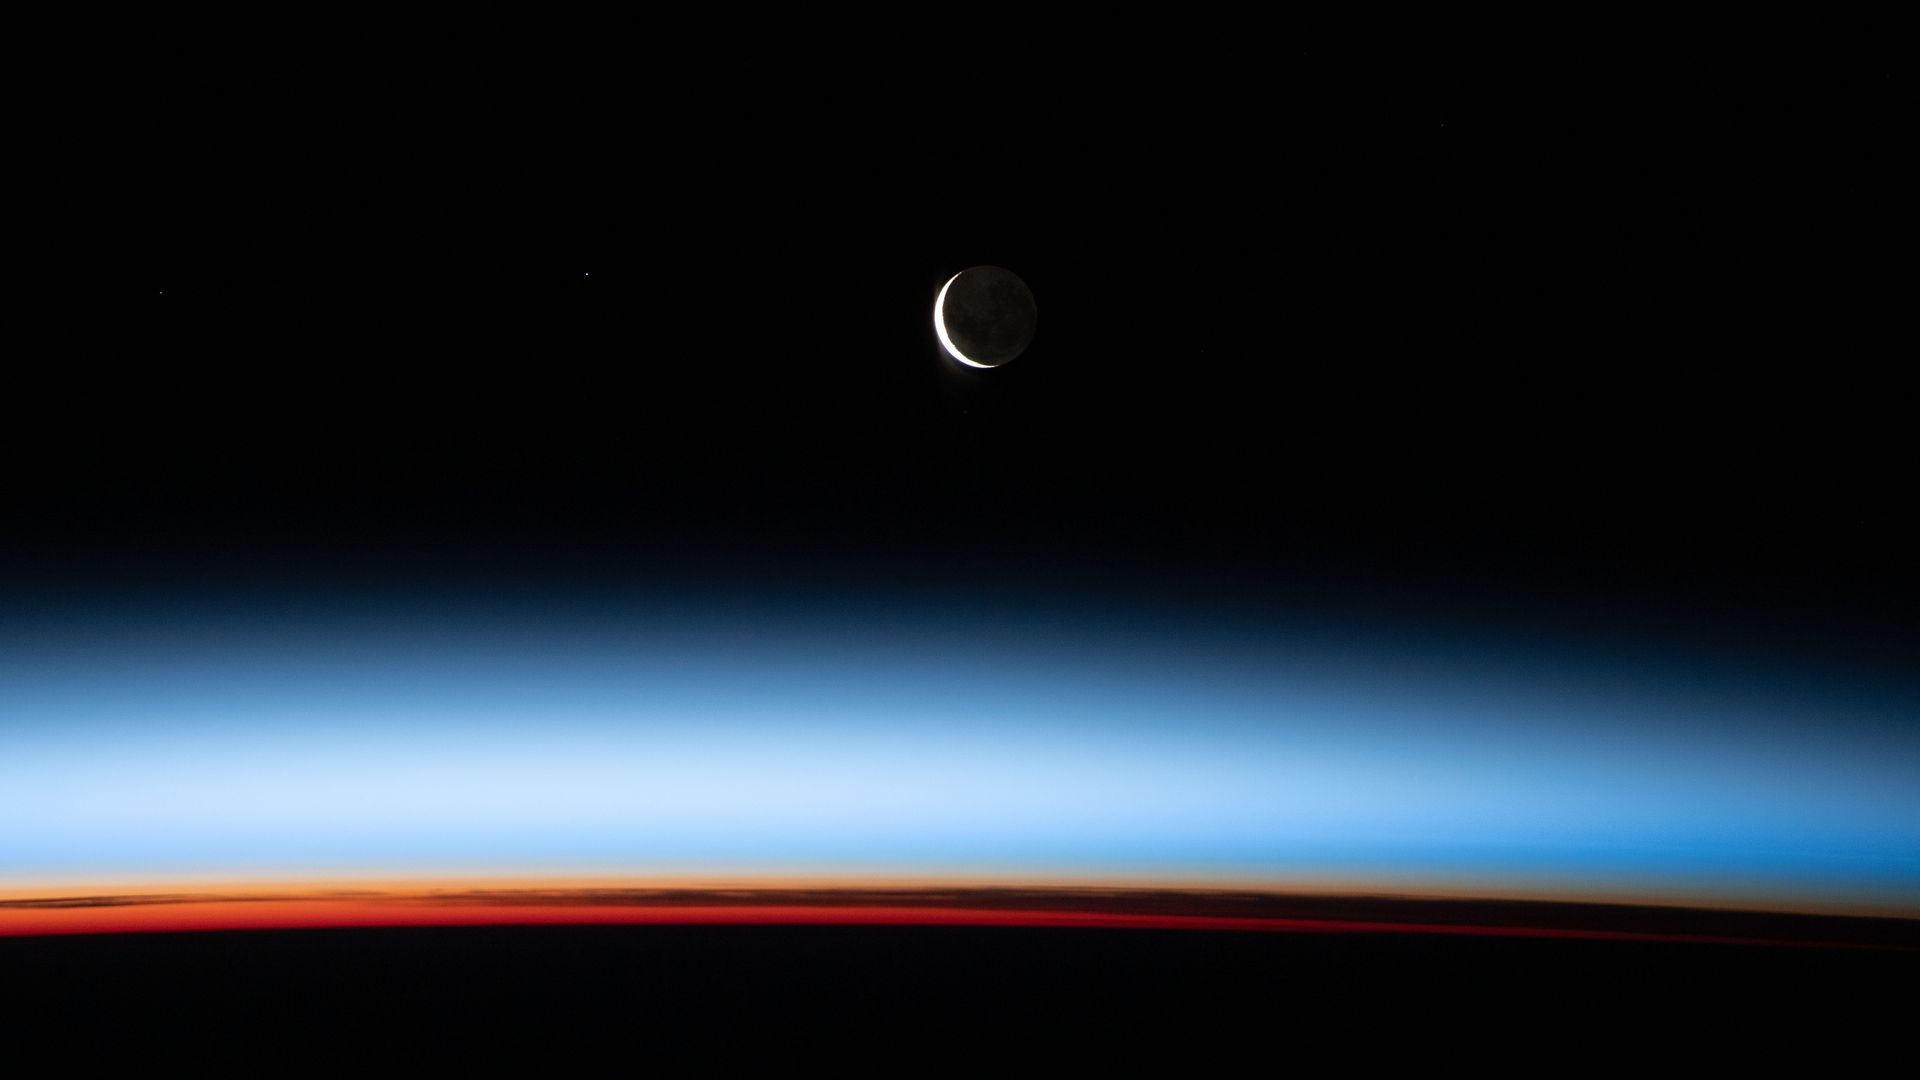 A crescent moon shines above the limb of the Earth with the blue glow of the atmosphere 